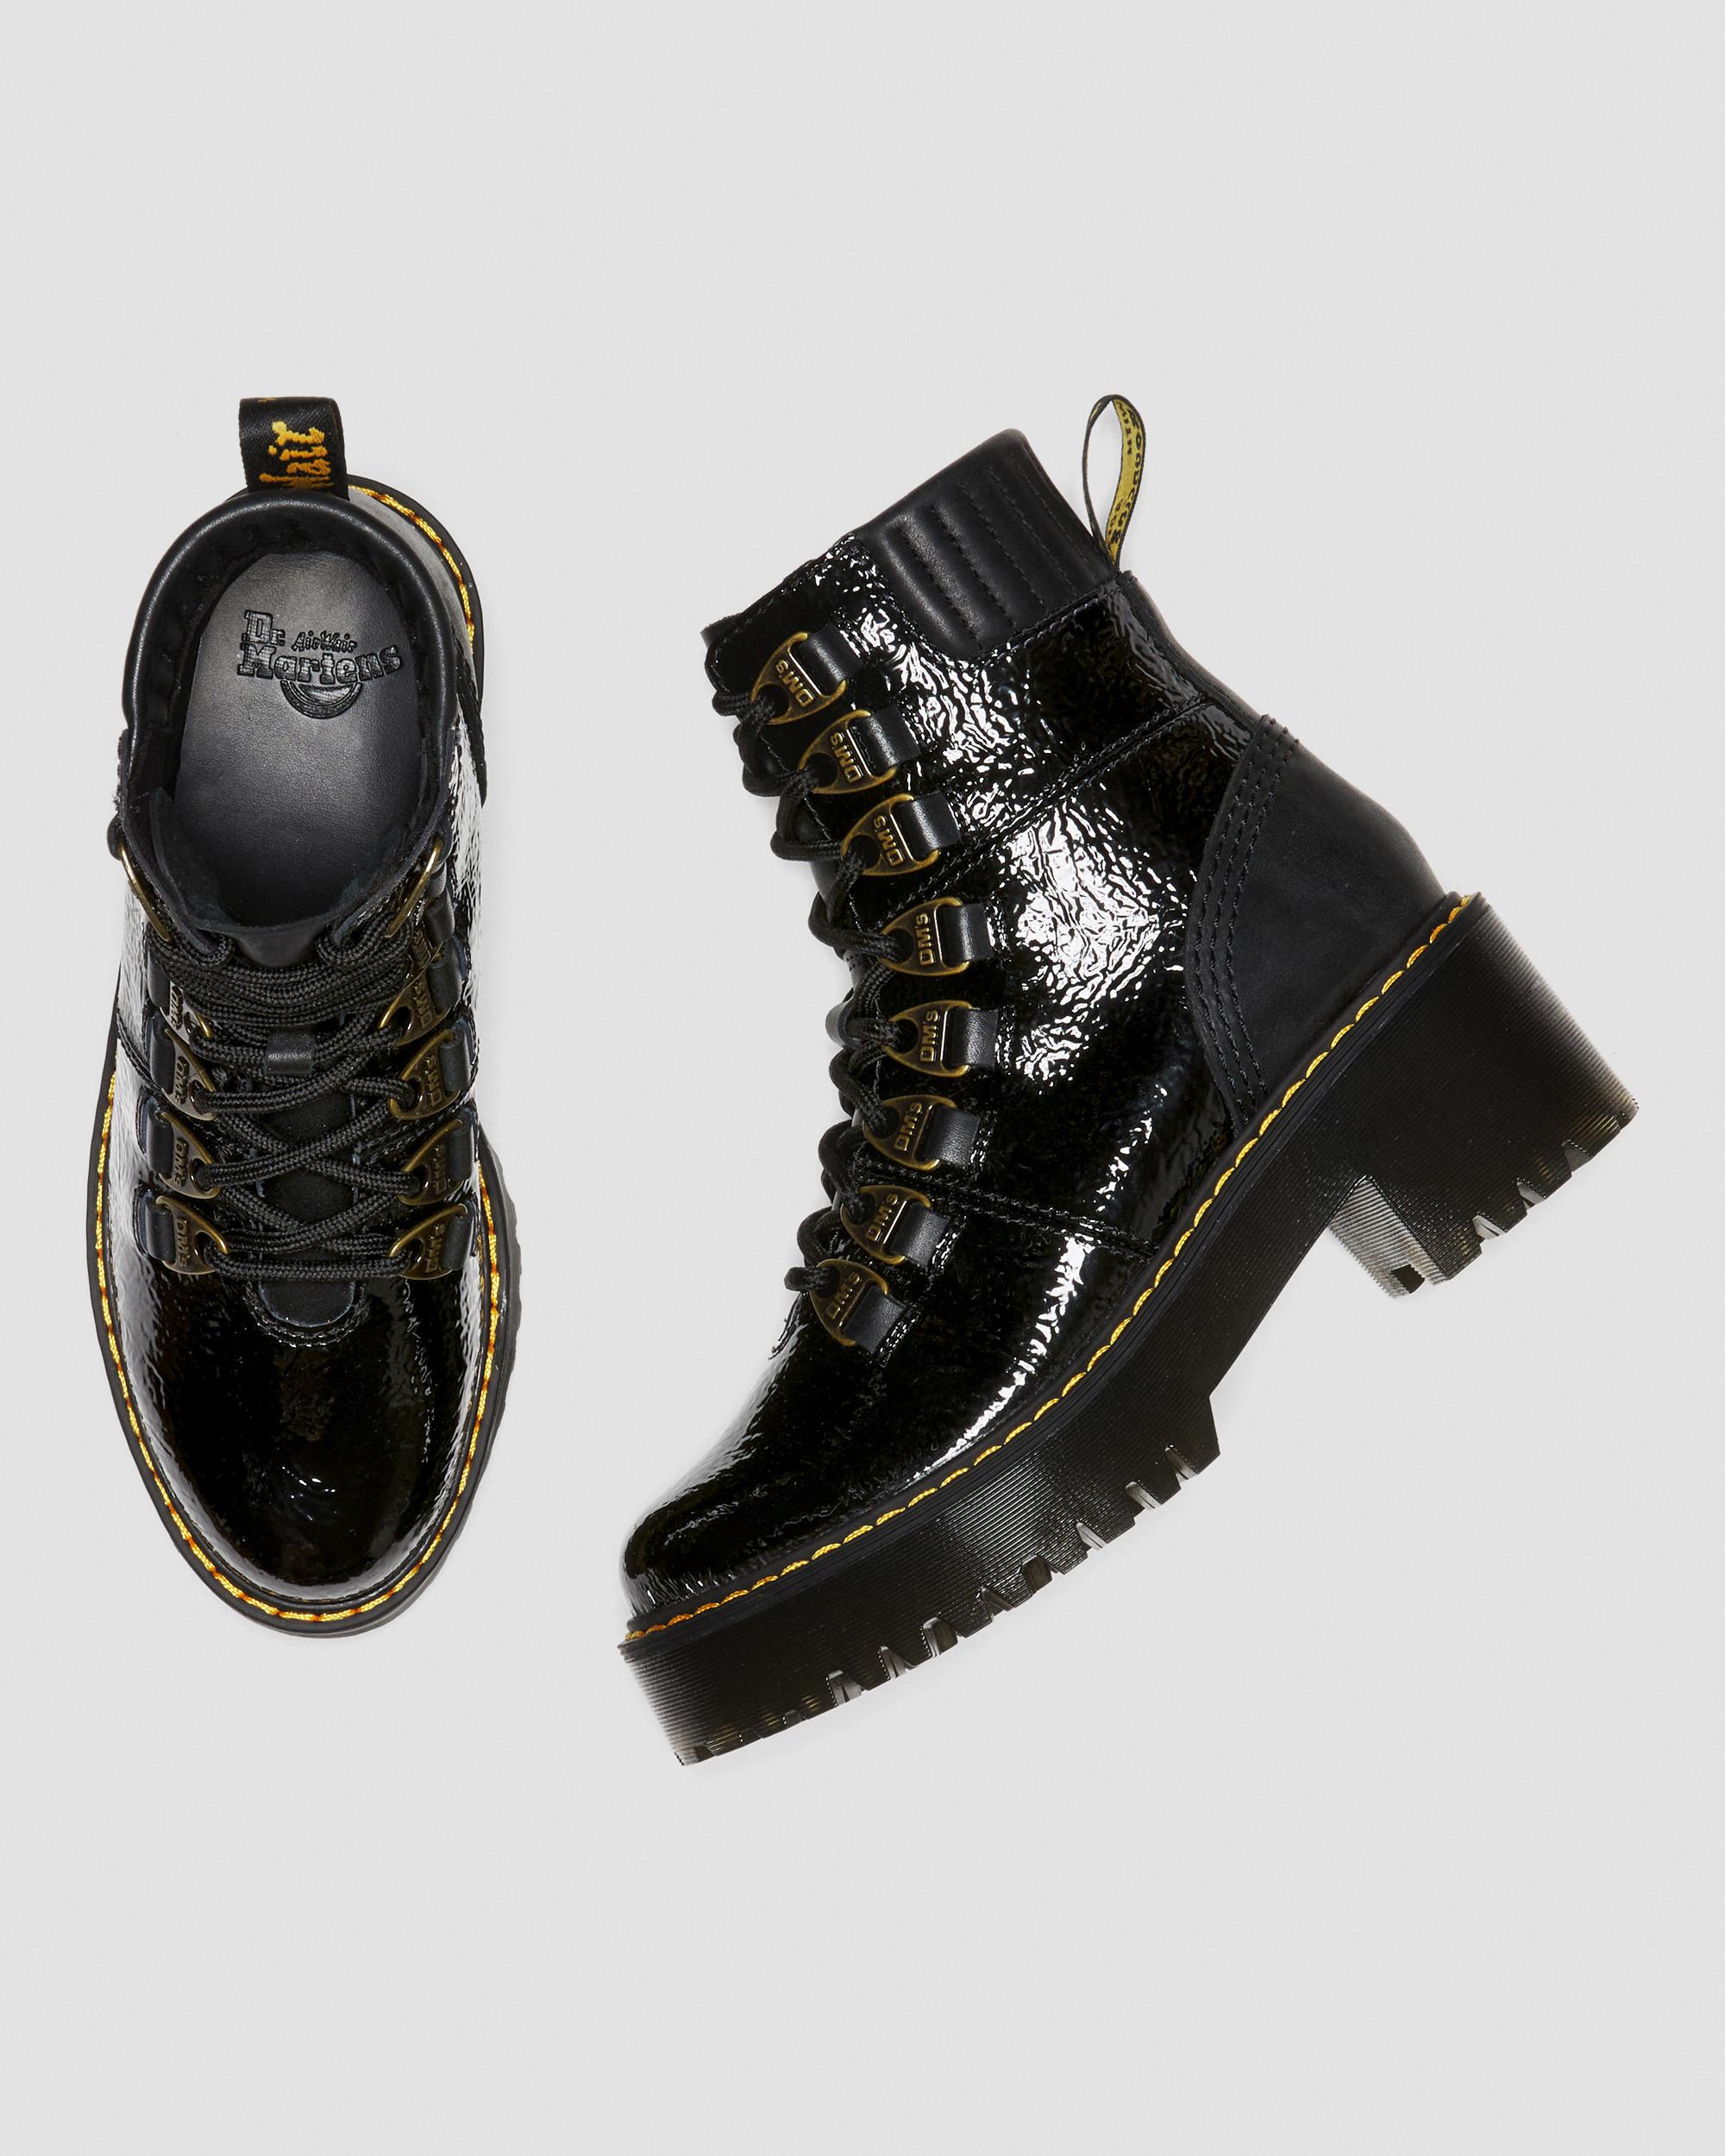 DR MARTENS Laurenne Distressed Patent Leather Lace Up Heel Boots